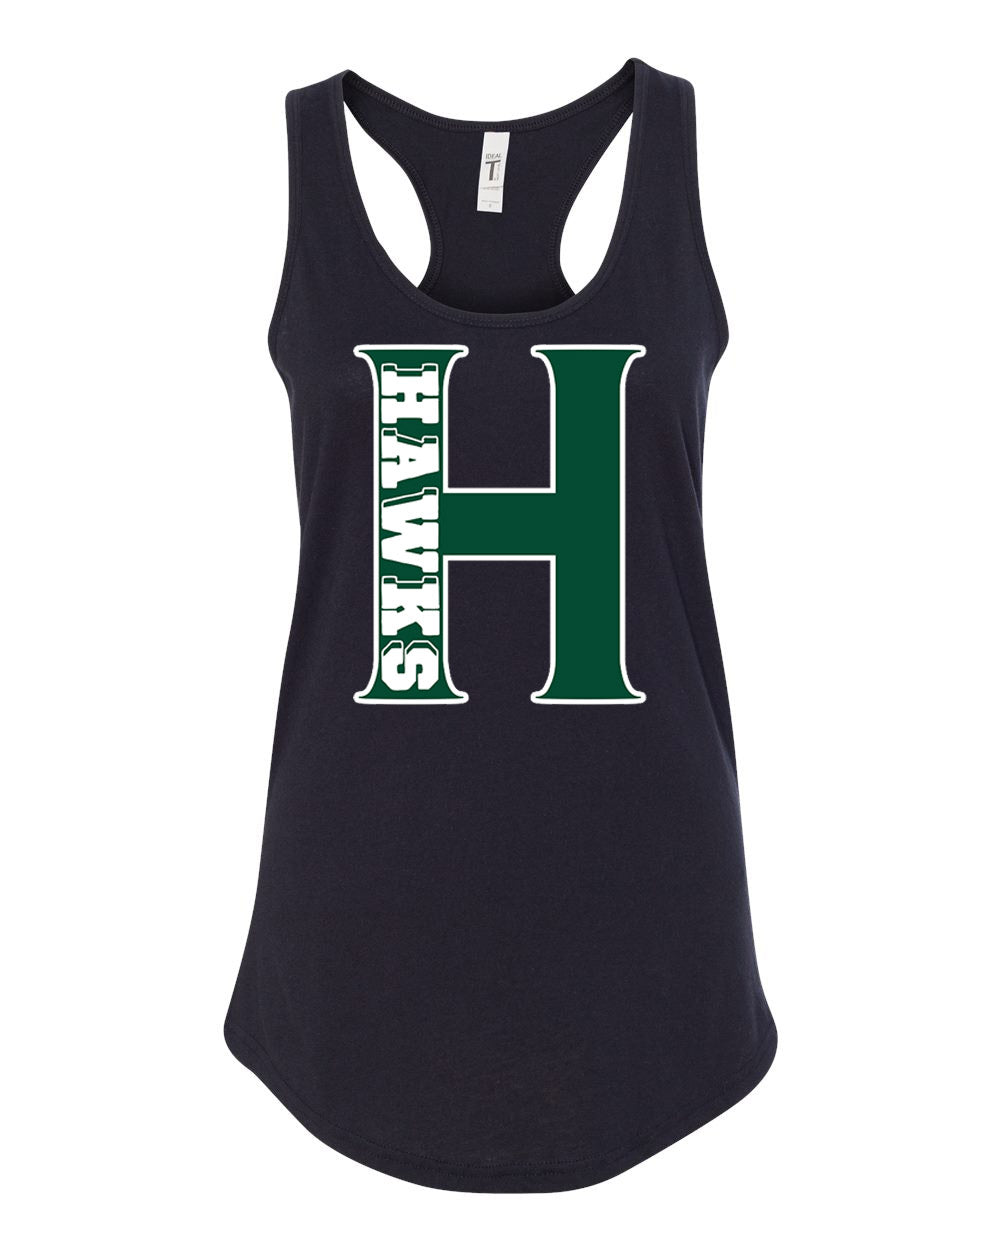 Hilltop Country Day School design 5 Tank Top